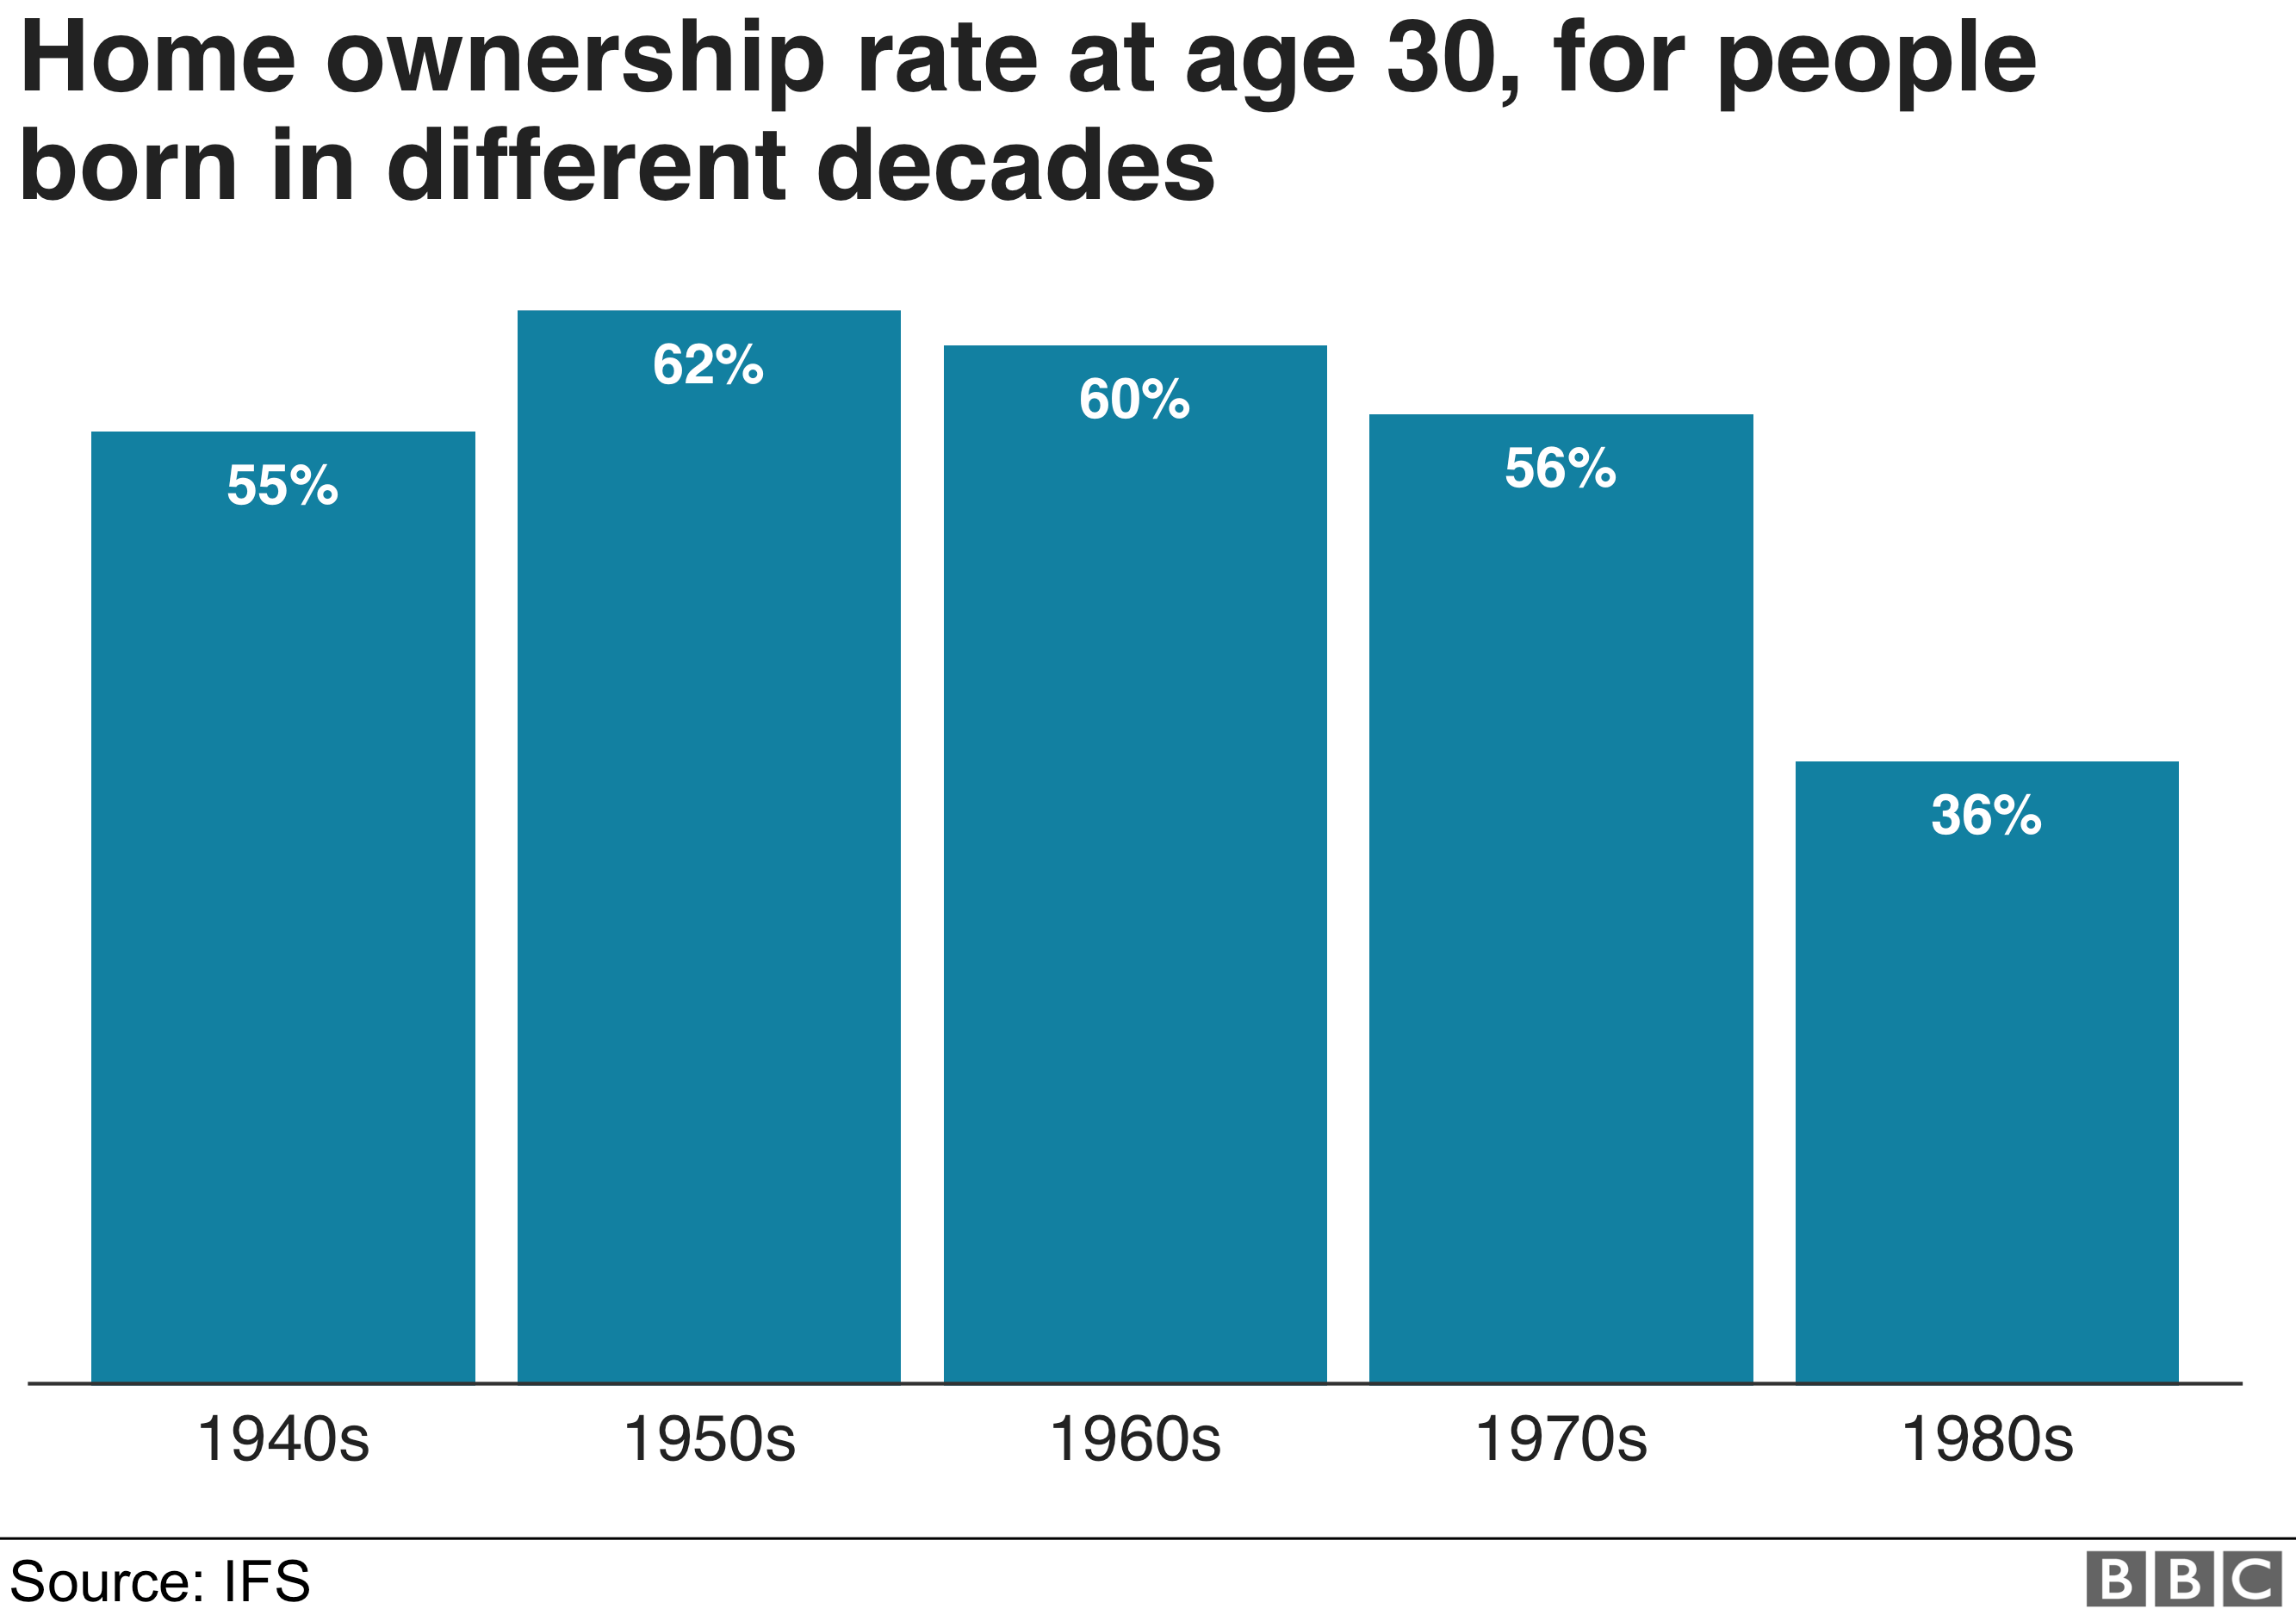 Chart entitled: Home ownership at age 30, for people born in different decades - shows how those born in the 1950s, 62% owned a house at the age of 30. For those born in the 1980s, that figure is 36%